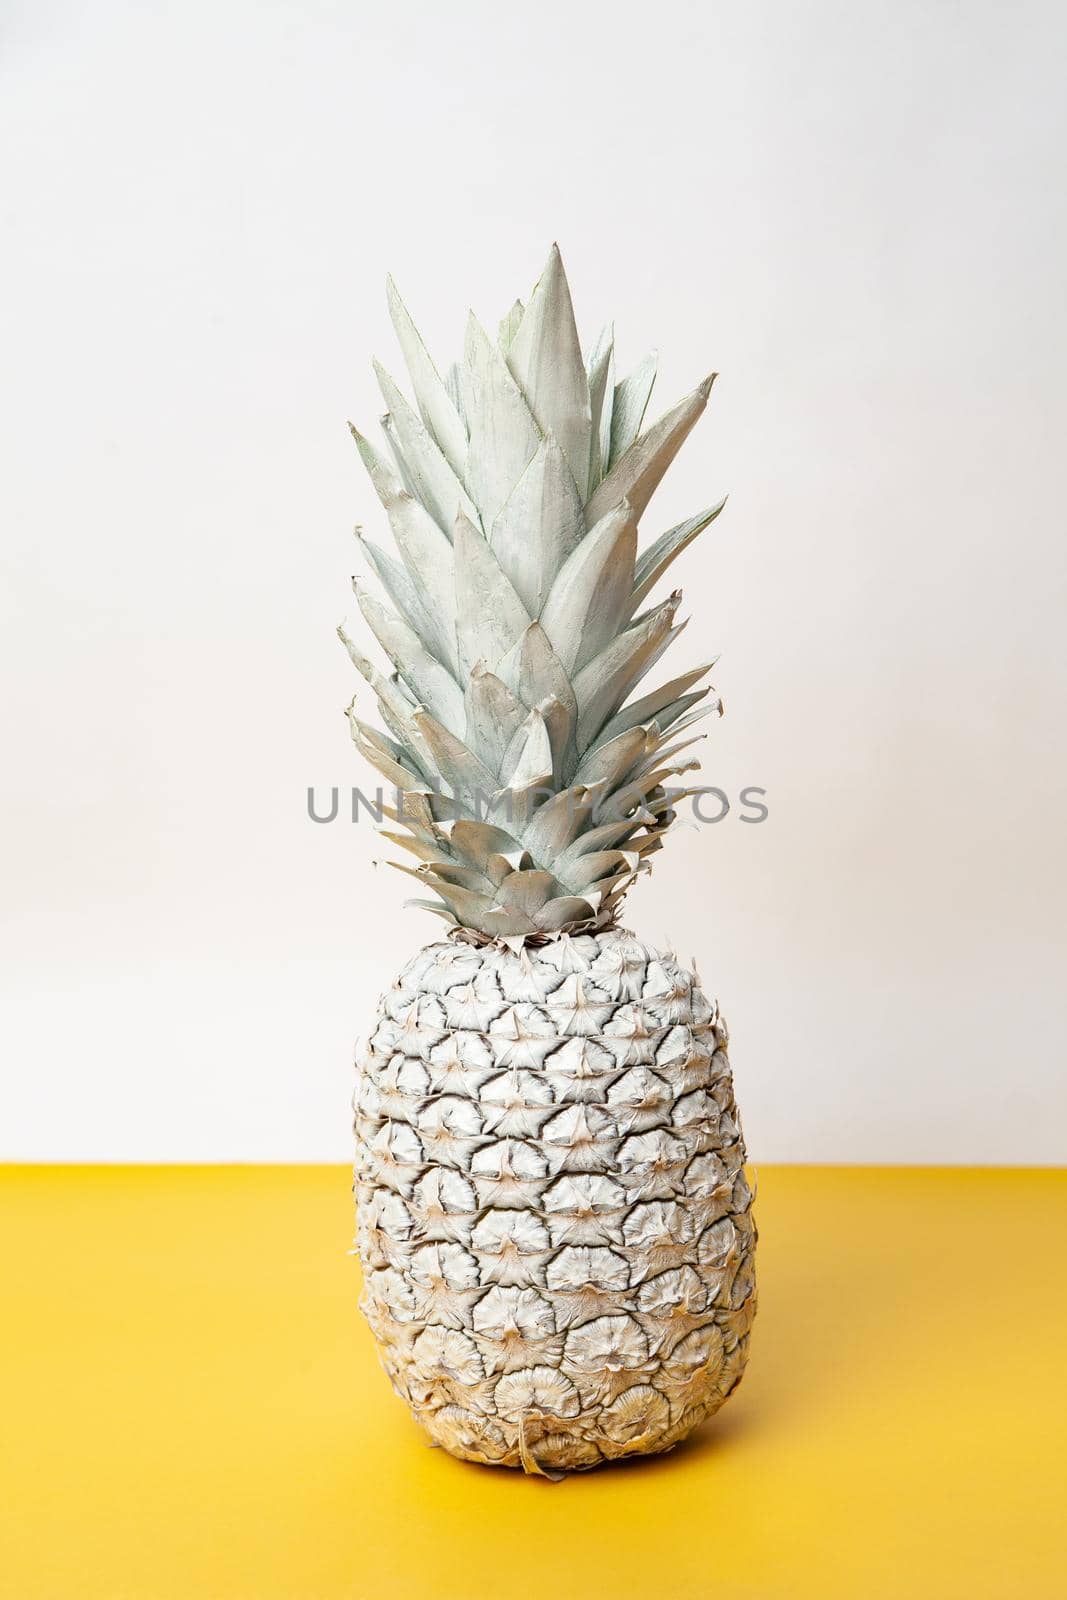 White pineapple on table in studio on white and yellow background by Julenochek